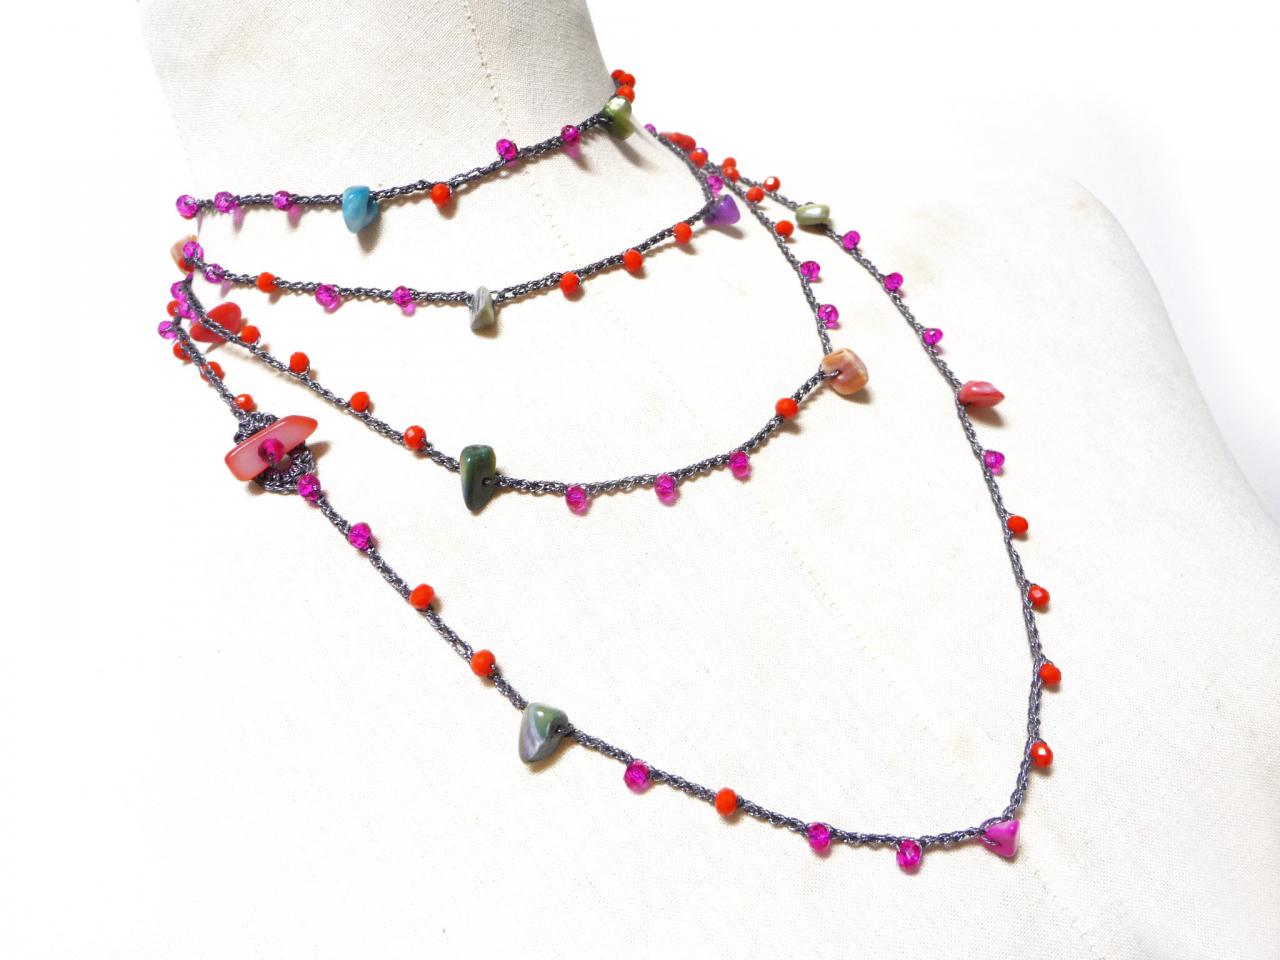 Extra Long Beaded Necklace With Orange And Pink Crystals + Multicolor Shell Chips, Crochet Boho Rosary Necklace